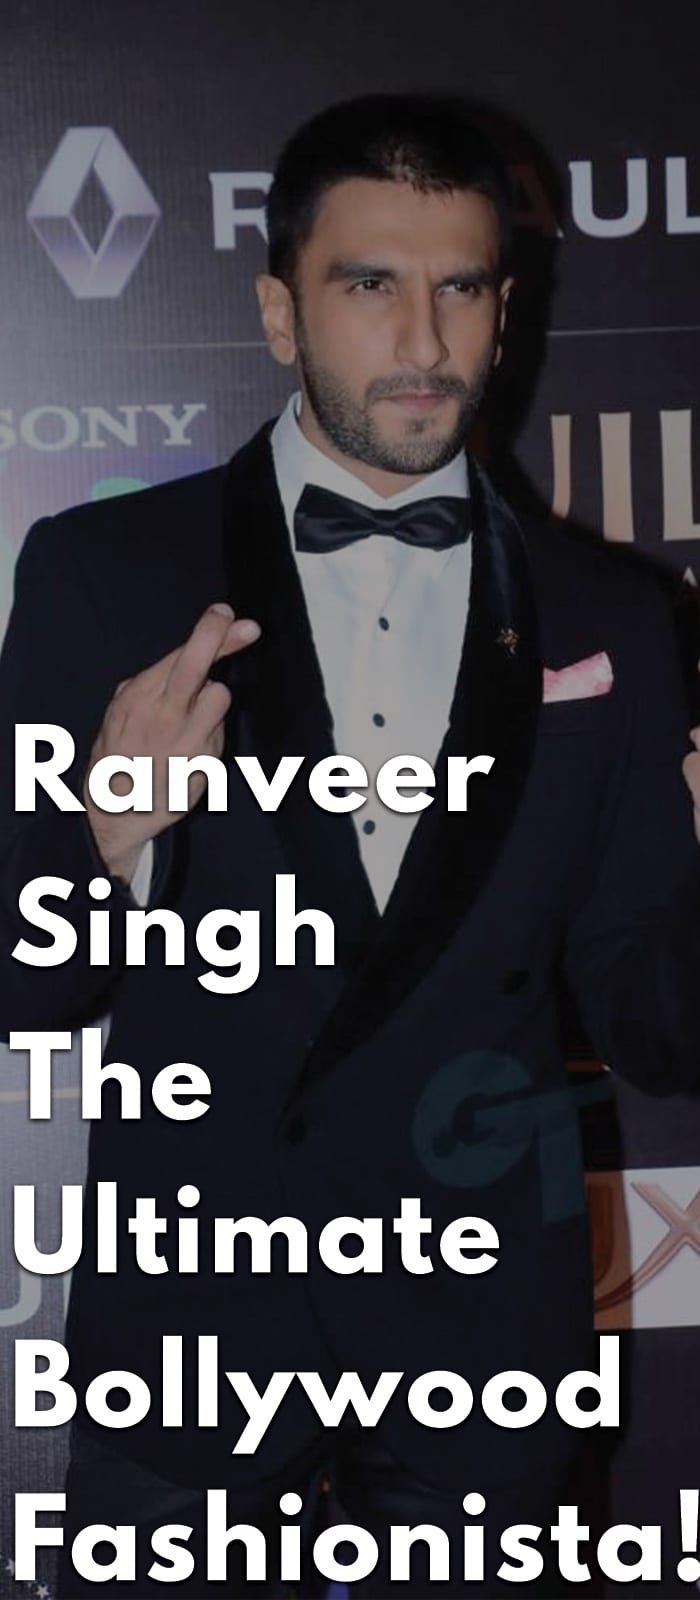 Ranveer-Singh-The-Ultimate-Bollywood-Fashionista!